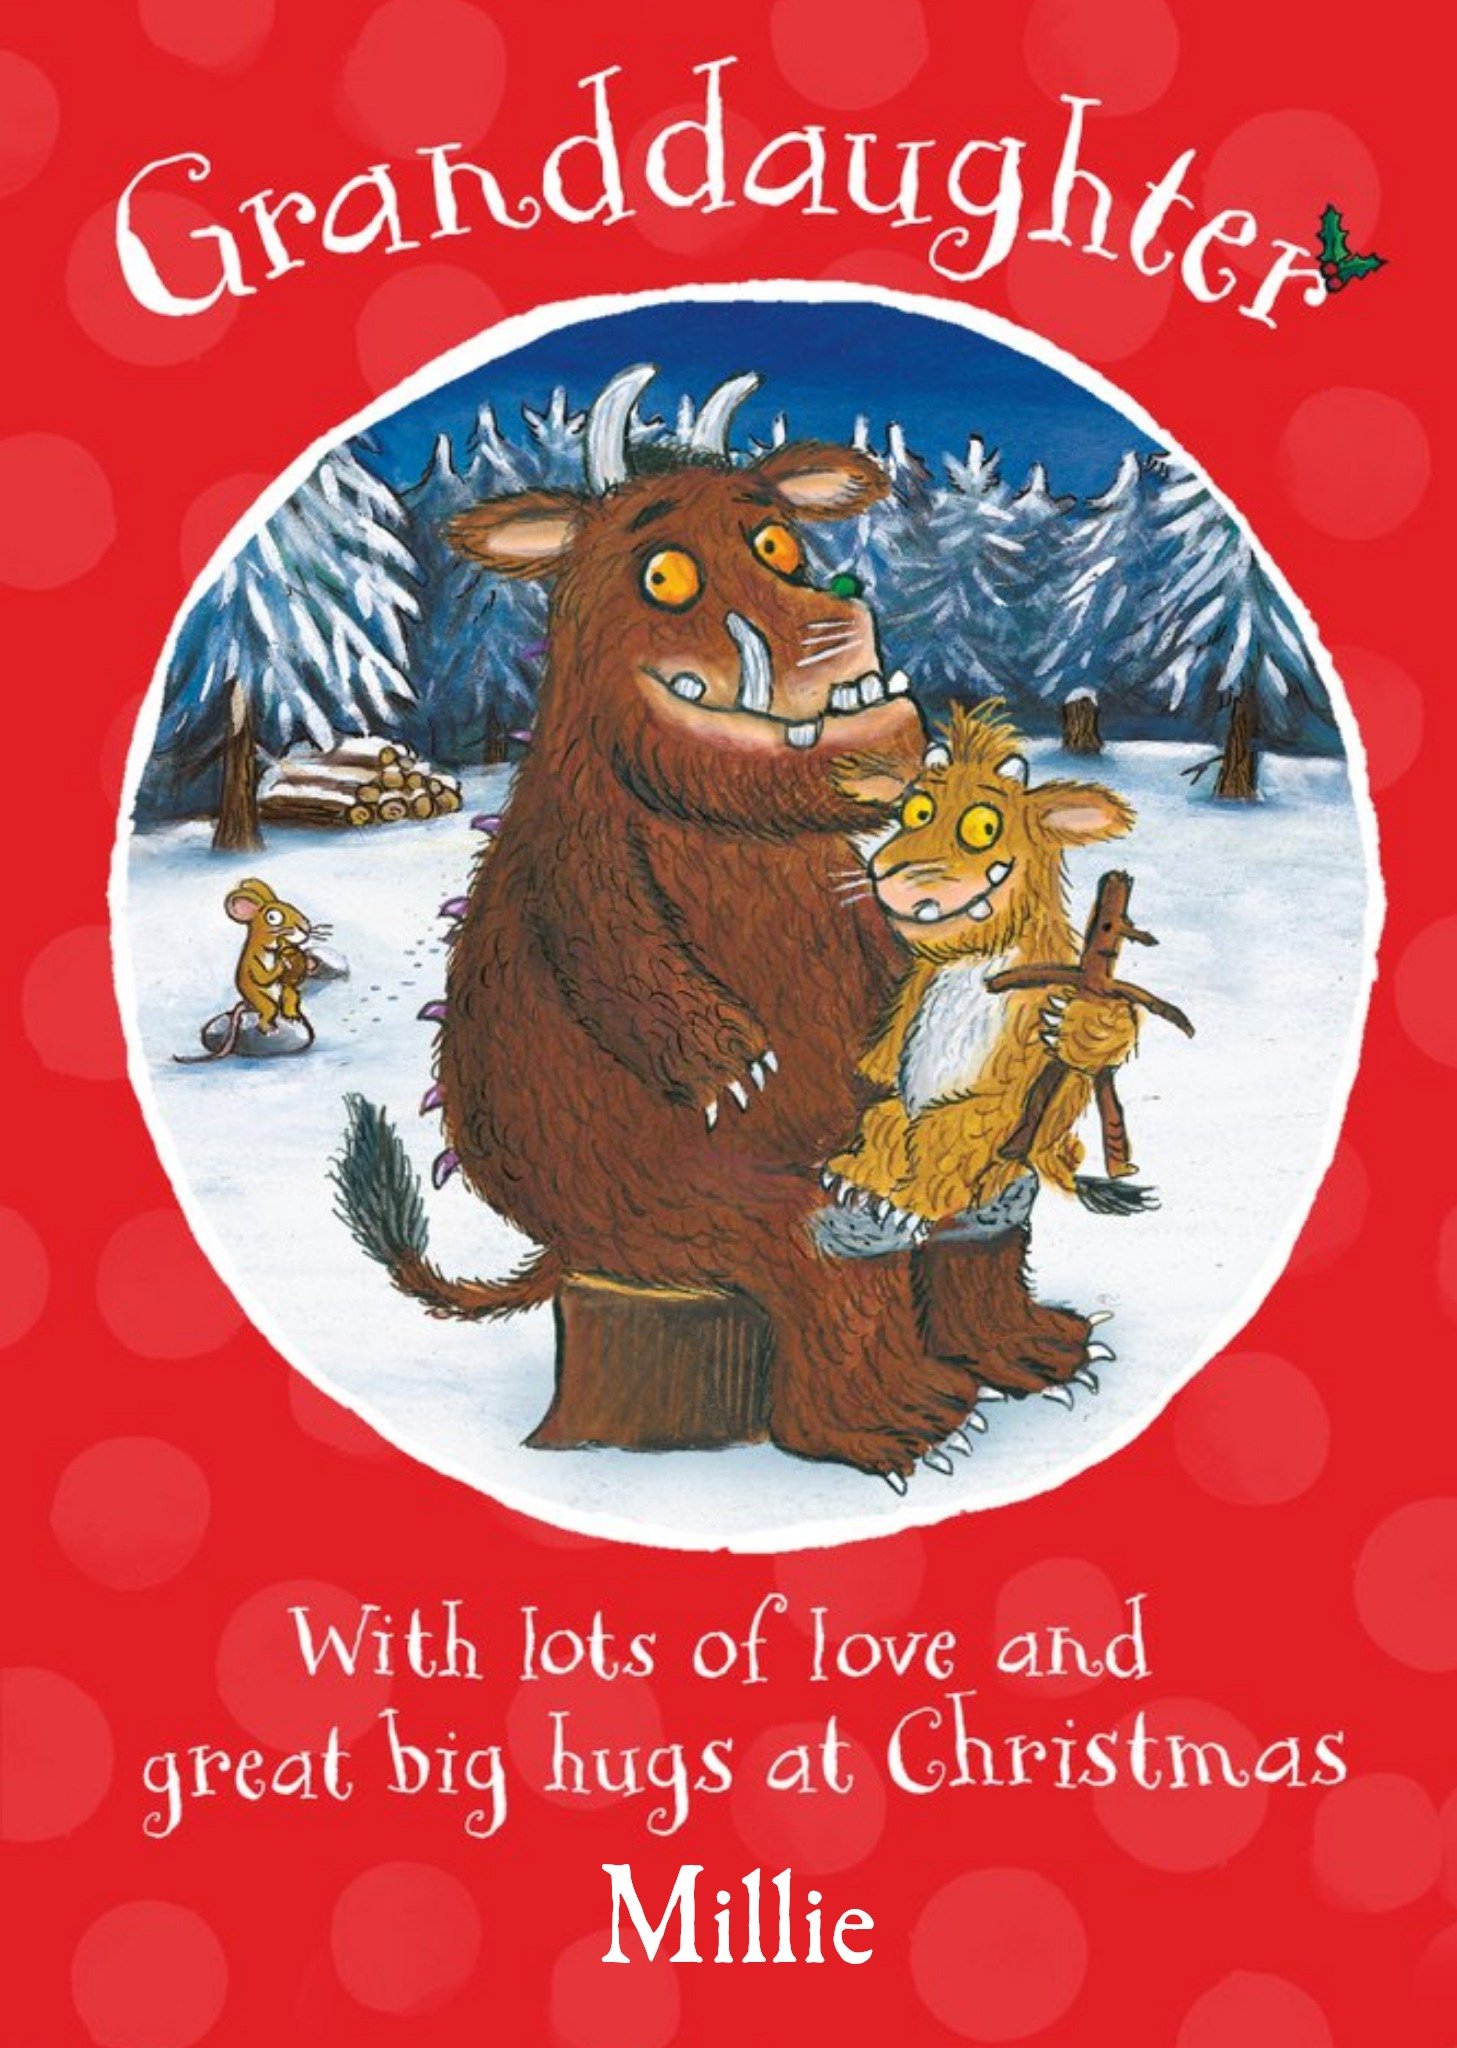 The Gruffalo's Child Granddaughter Christmas Card, Large